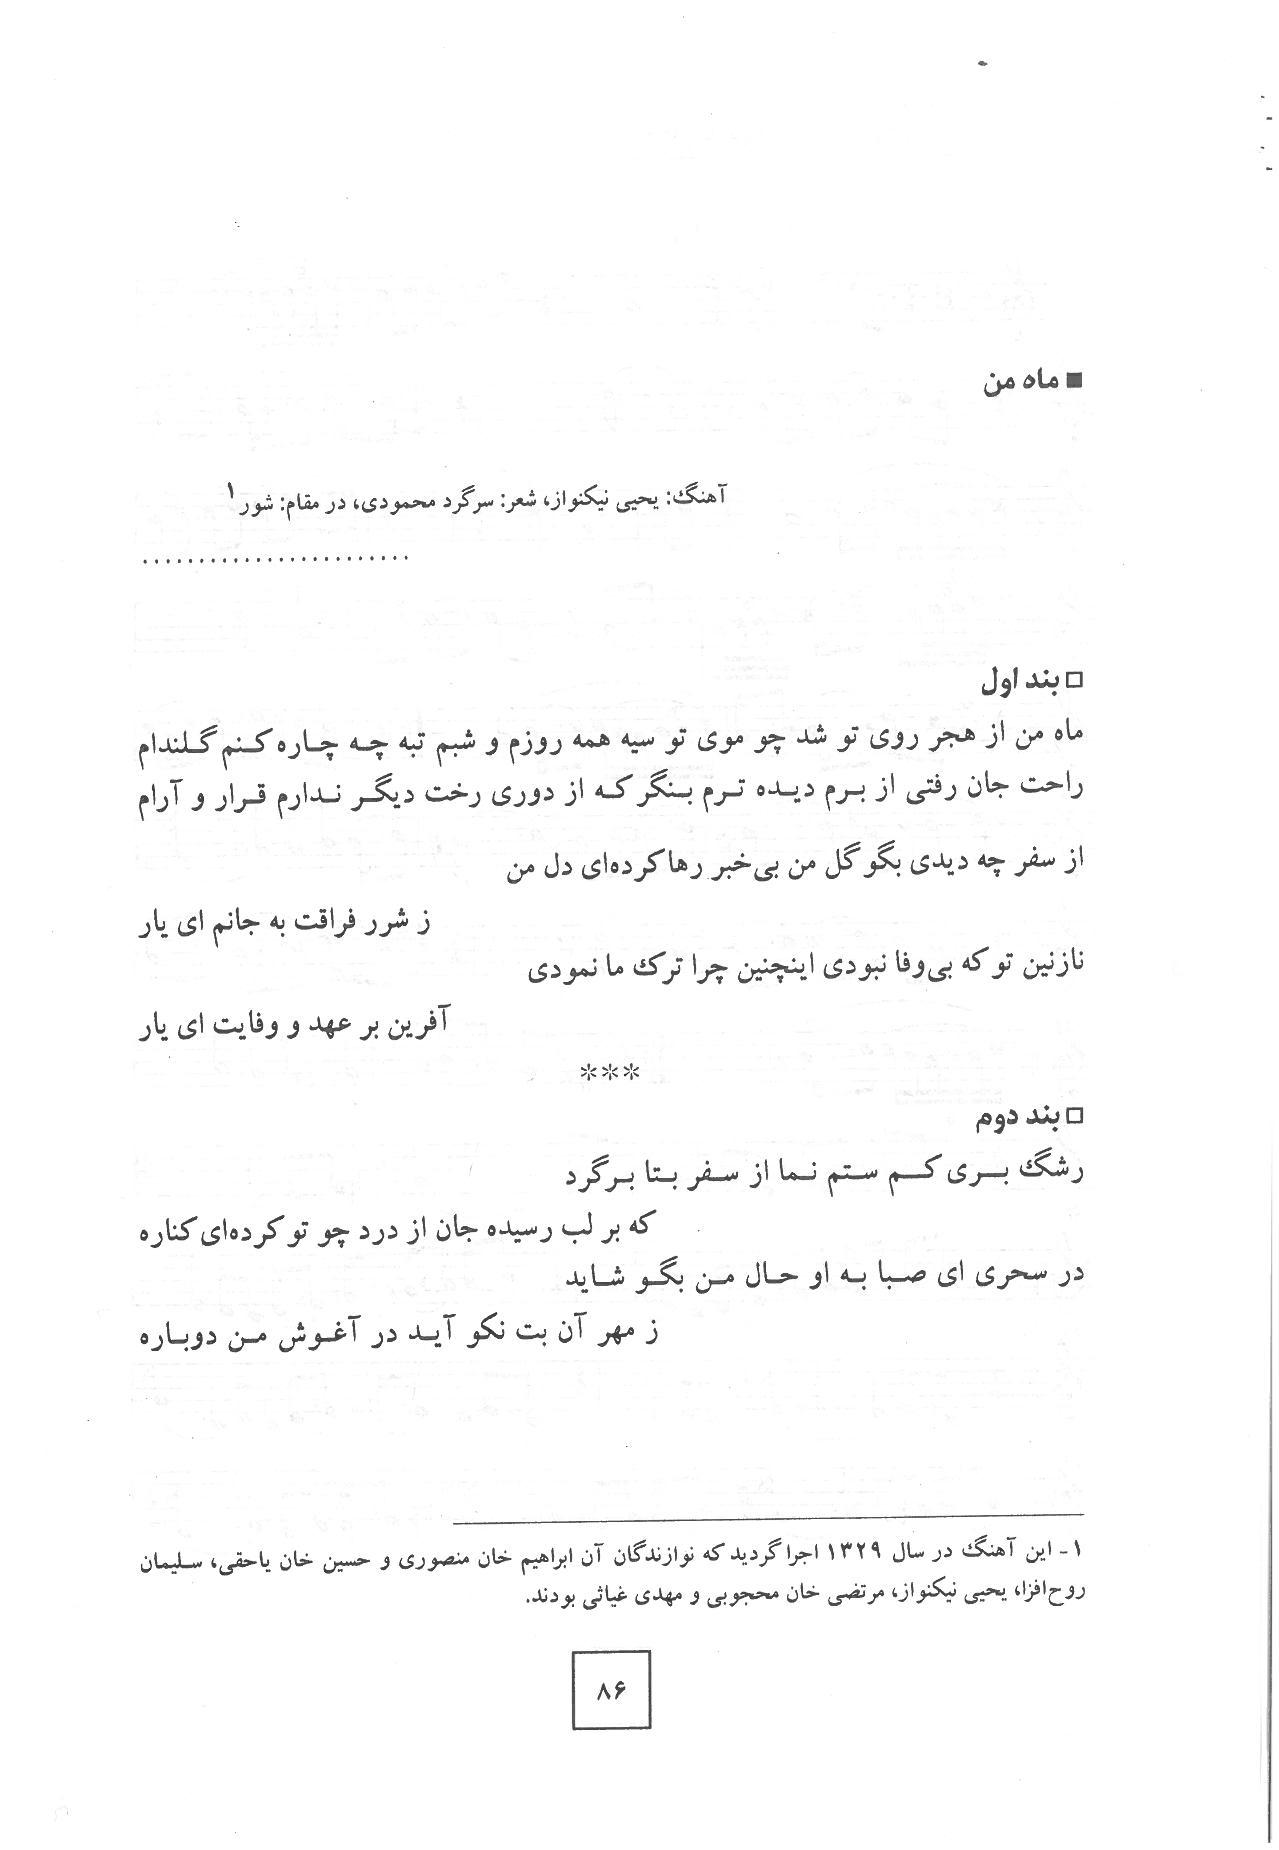 A page of an arabic language document with the text.